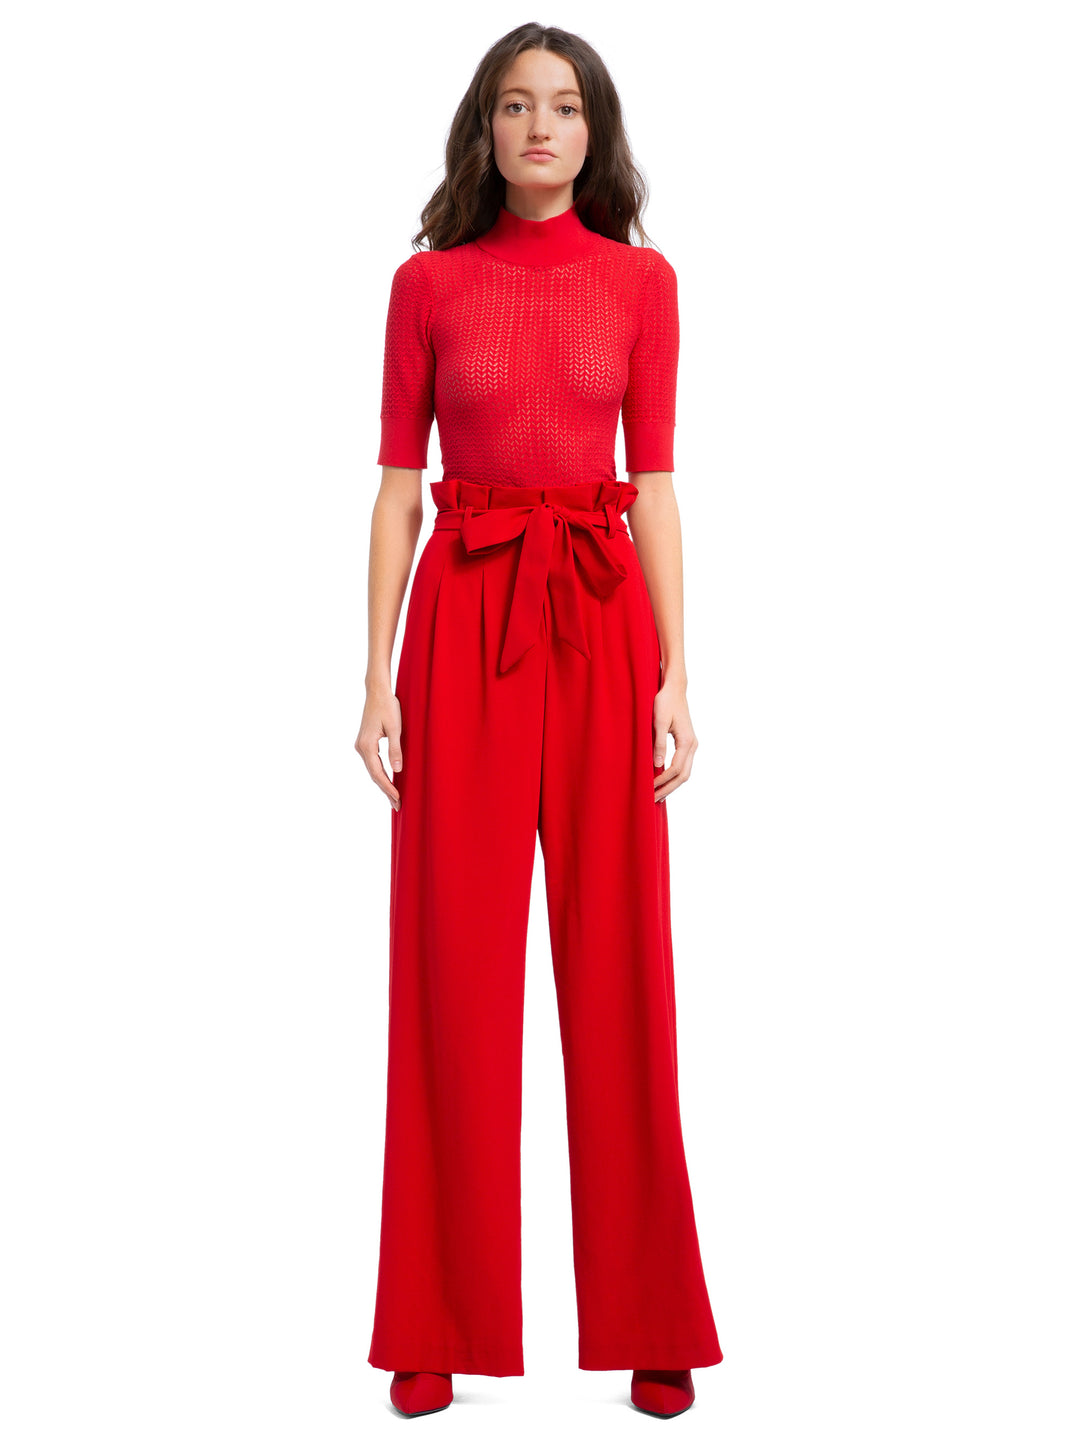 Alice + Olivia- Farrel Paper Bag Pleated Pants in Cherry